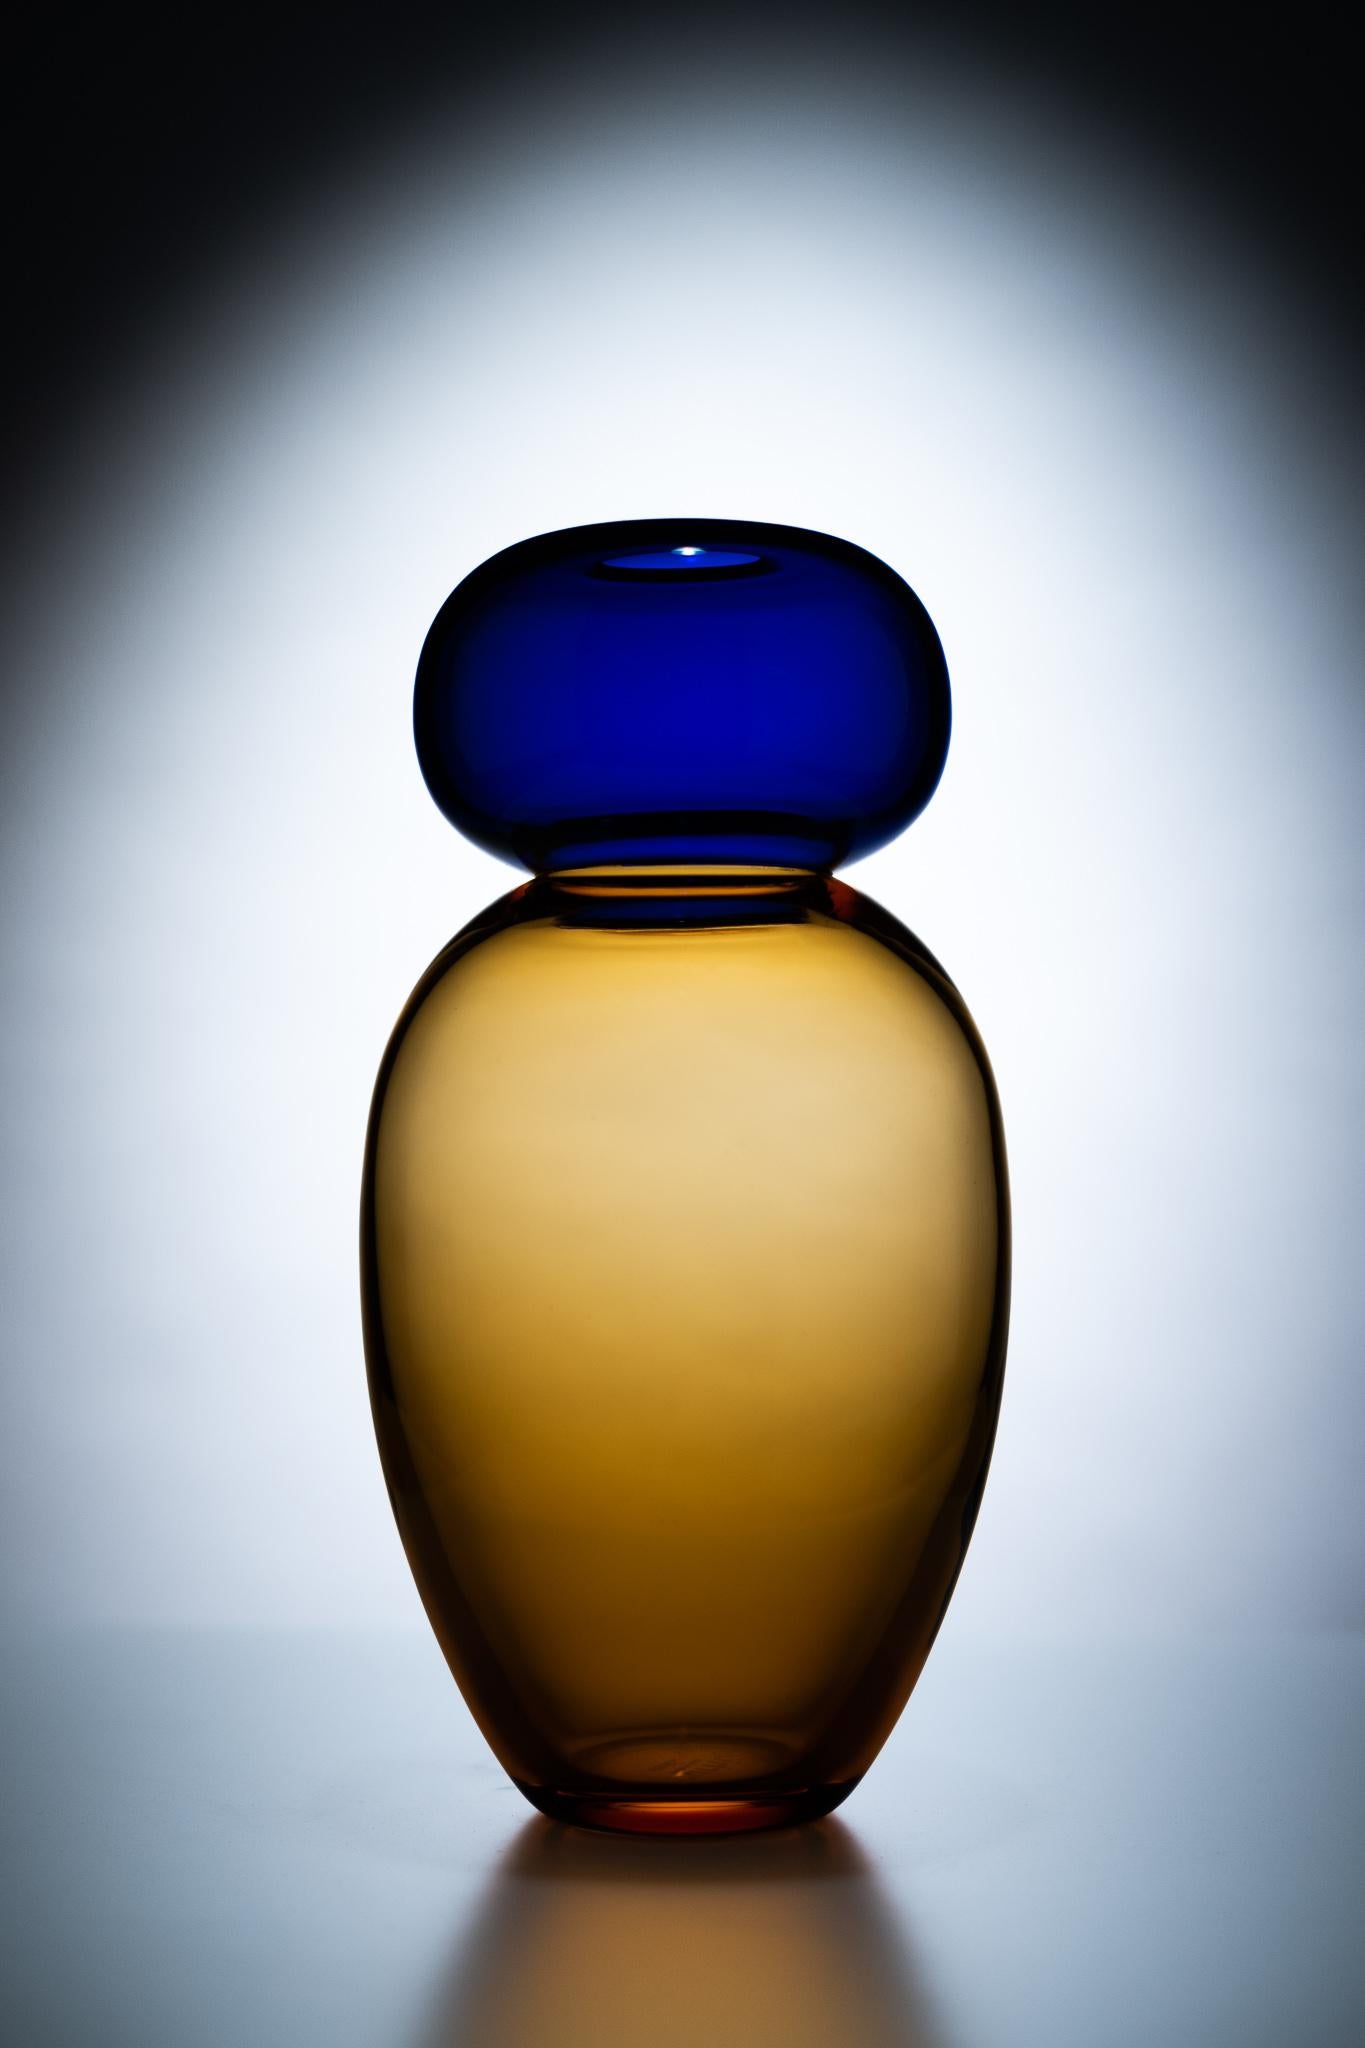 21st century Karim Rashid Queen vase Murano glass various Amber base Blue Top
Queen designed by Karim Rashid is a curvaceous vase that combine regality with visual wit. Proposed in combination with King, the top of Queen resembles a rounded “halo”,